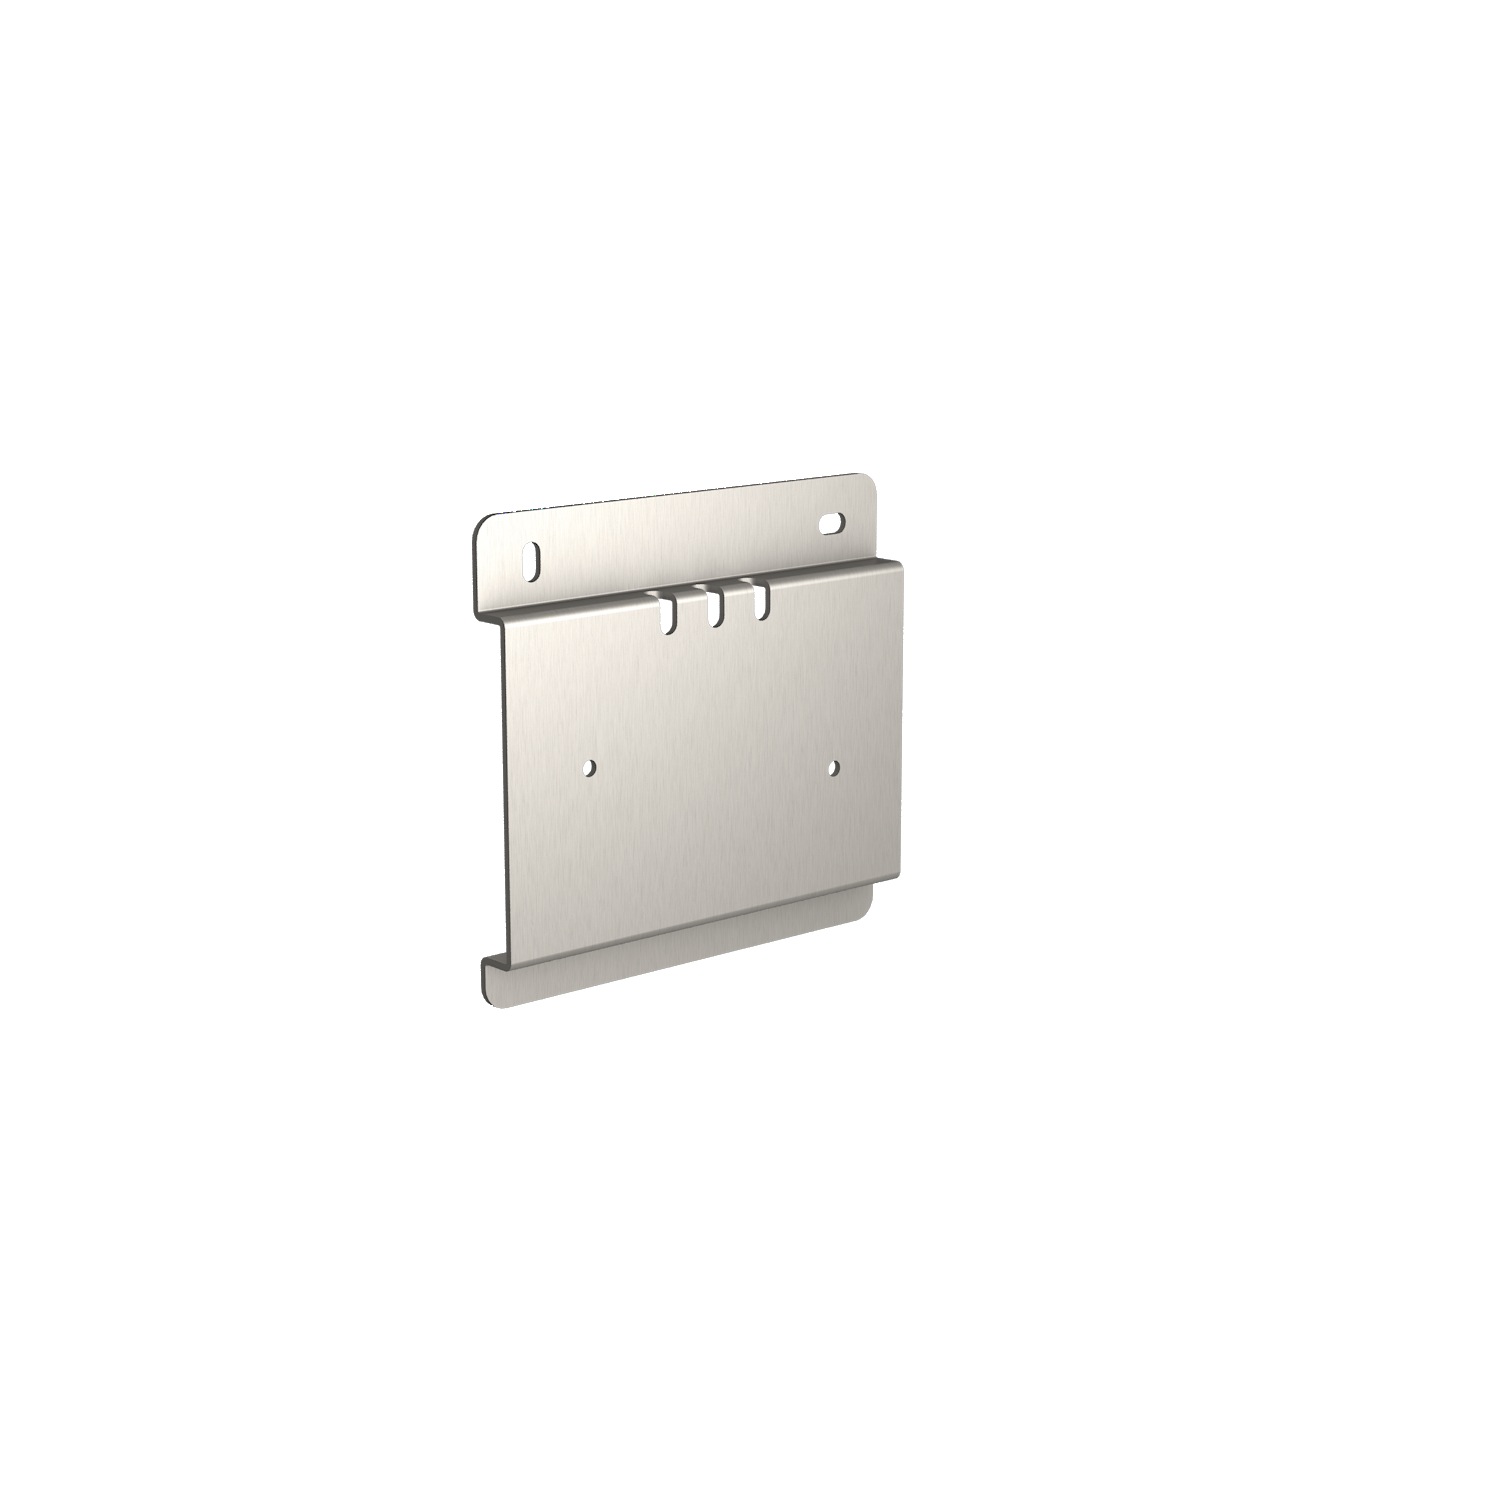 Wall bracket set for Dome 20 active box